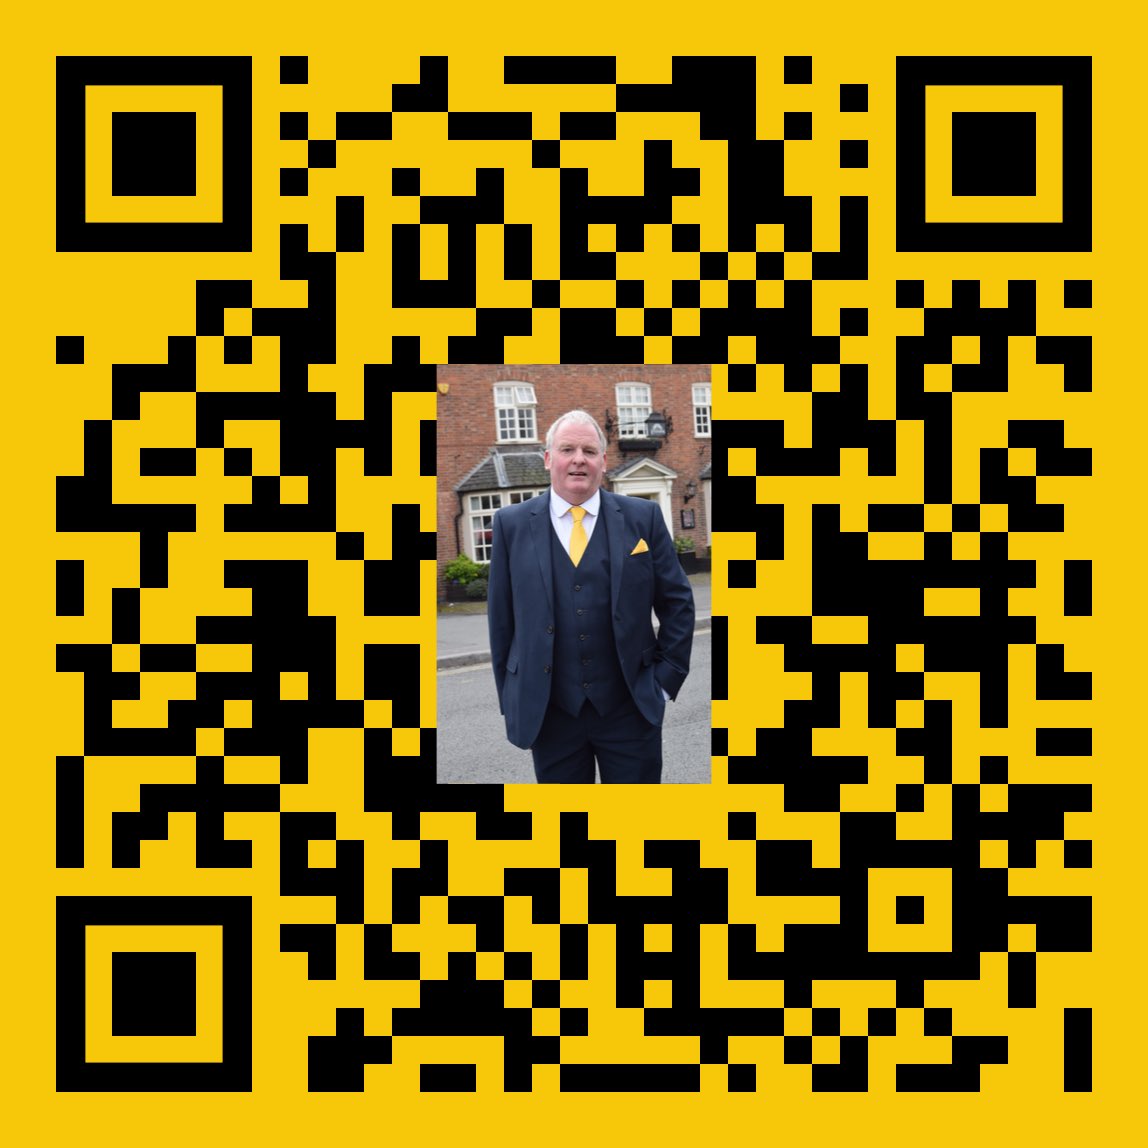 Cllr Martin Cartwright QR Code:

Scan with smart phone to access my:

: Save my details
: Calk Mobile & Landline
: Email me
: Text me
: WhatsApp me
: Snapchat me
: Facebook, Twitter & Instagram
: View Groby Spotlight Articles
: Call Hinckley & Bosworth Council
: Visit HBBC